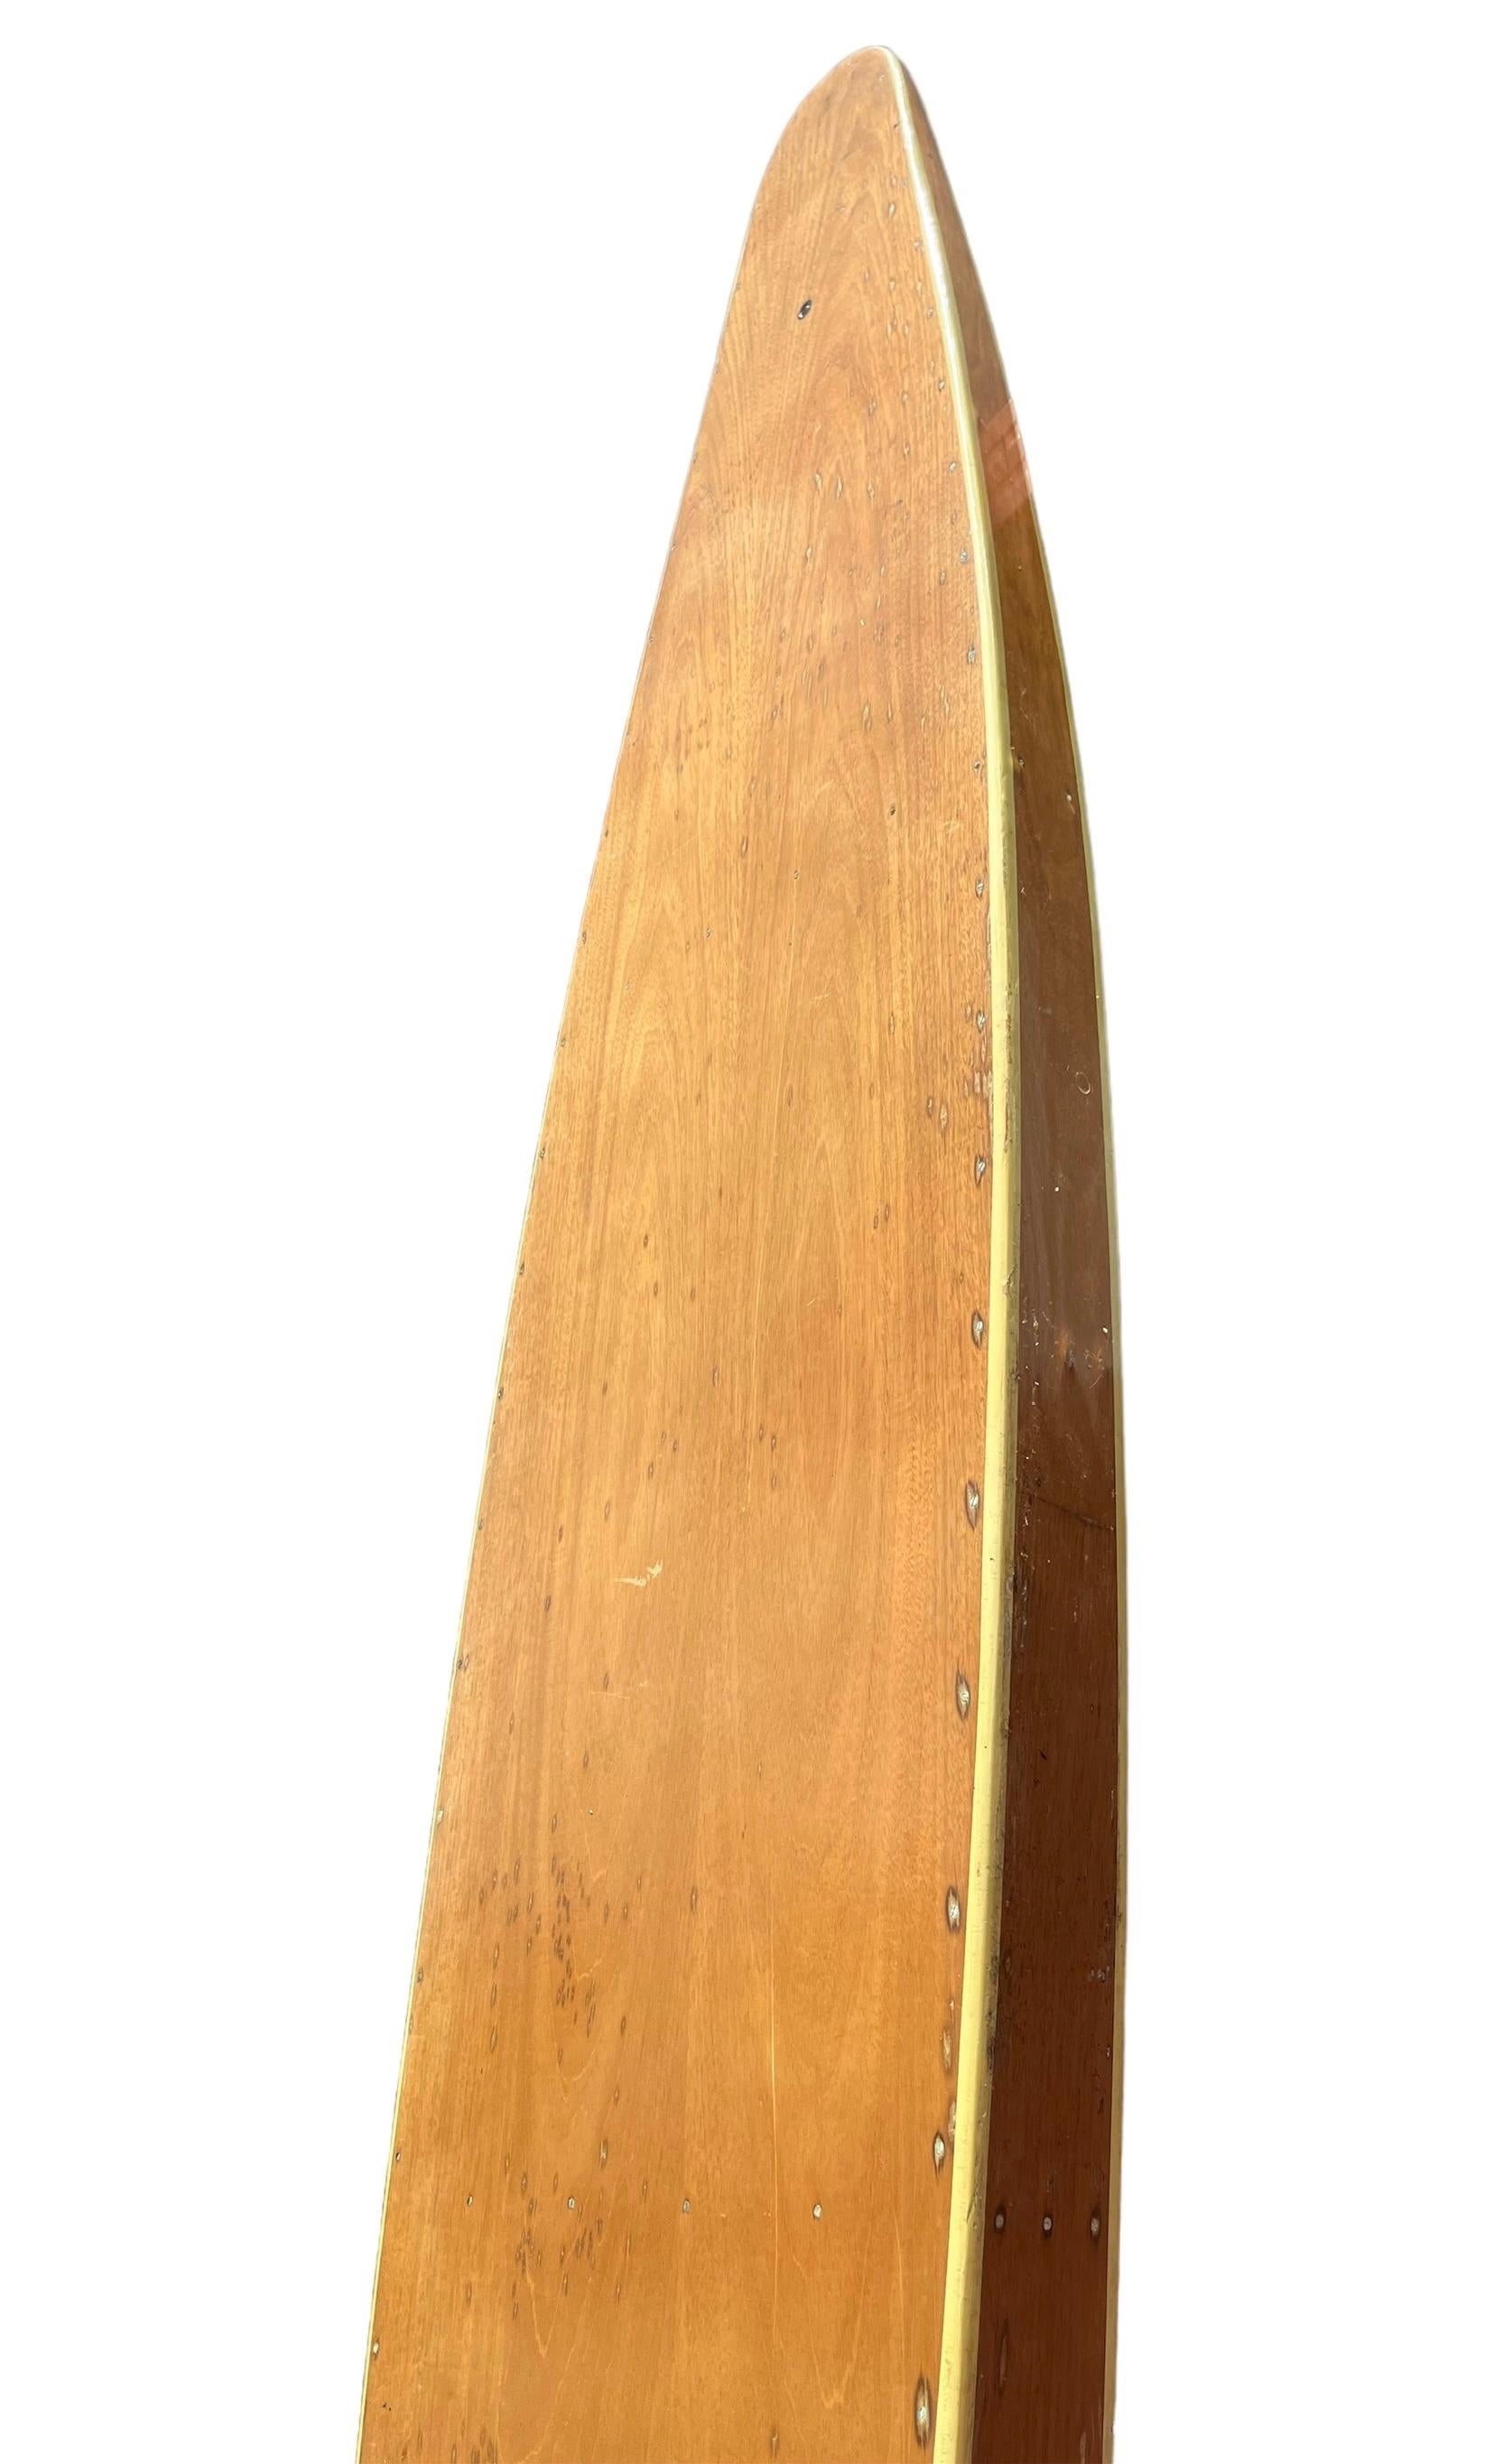 American 1930s Replica Tom Blake hollow wooden surfboard For Sale